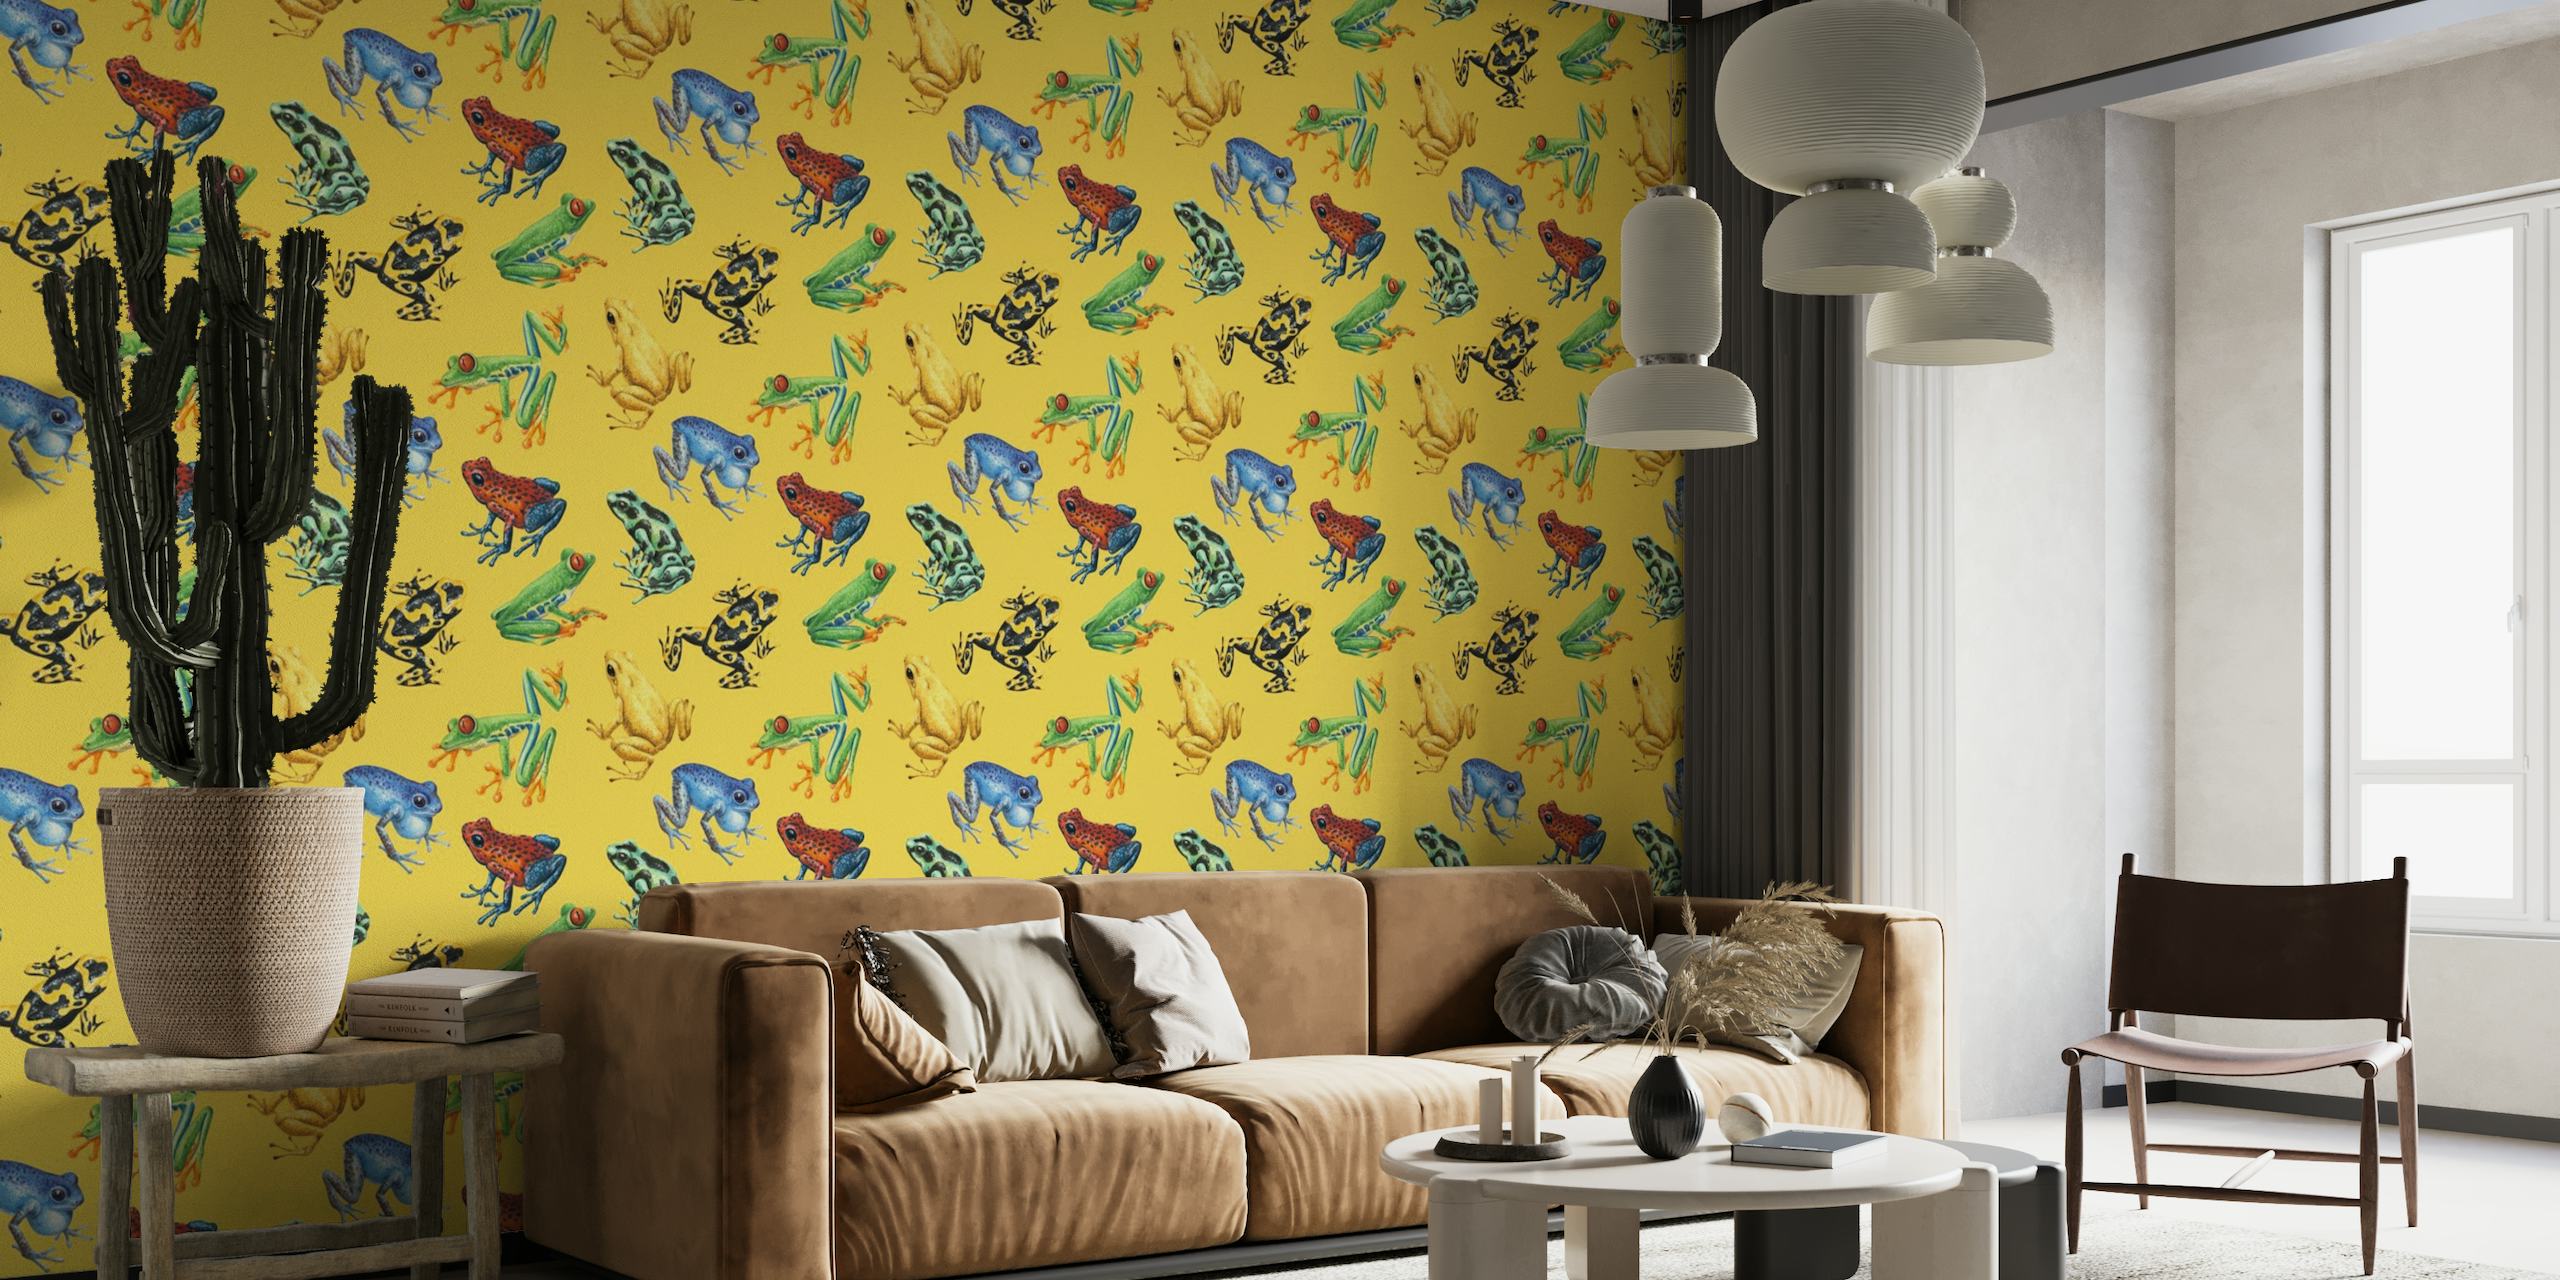 Colorful frogs illustrated on a bright yellow background wall mural